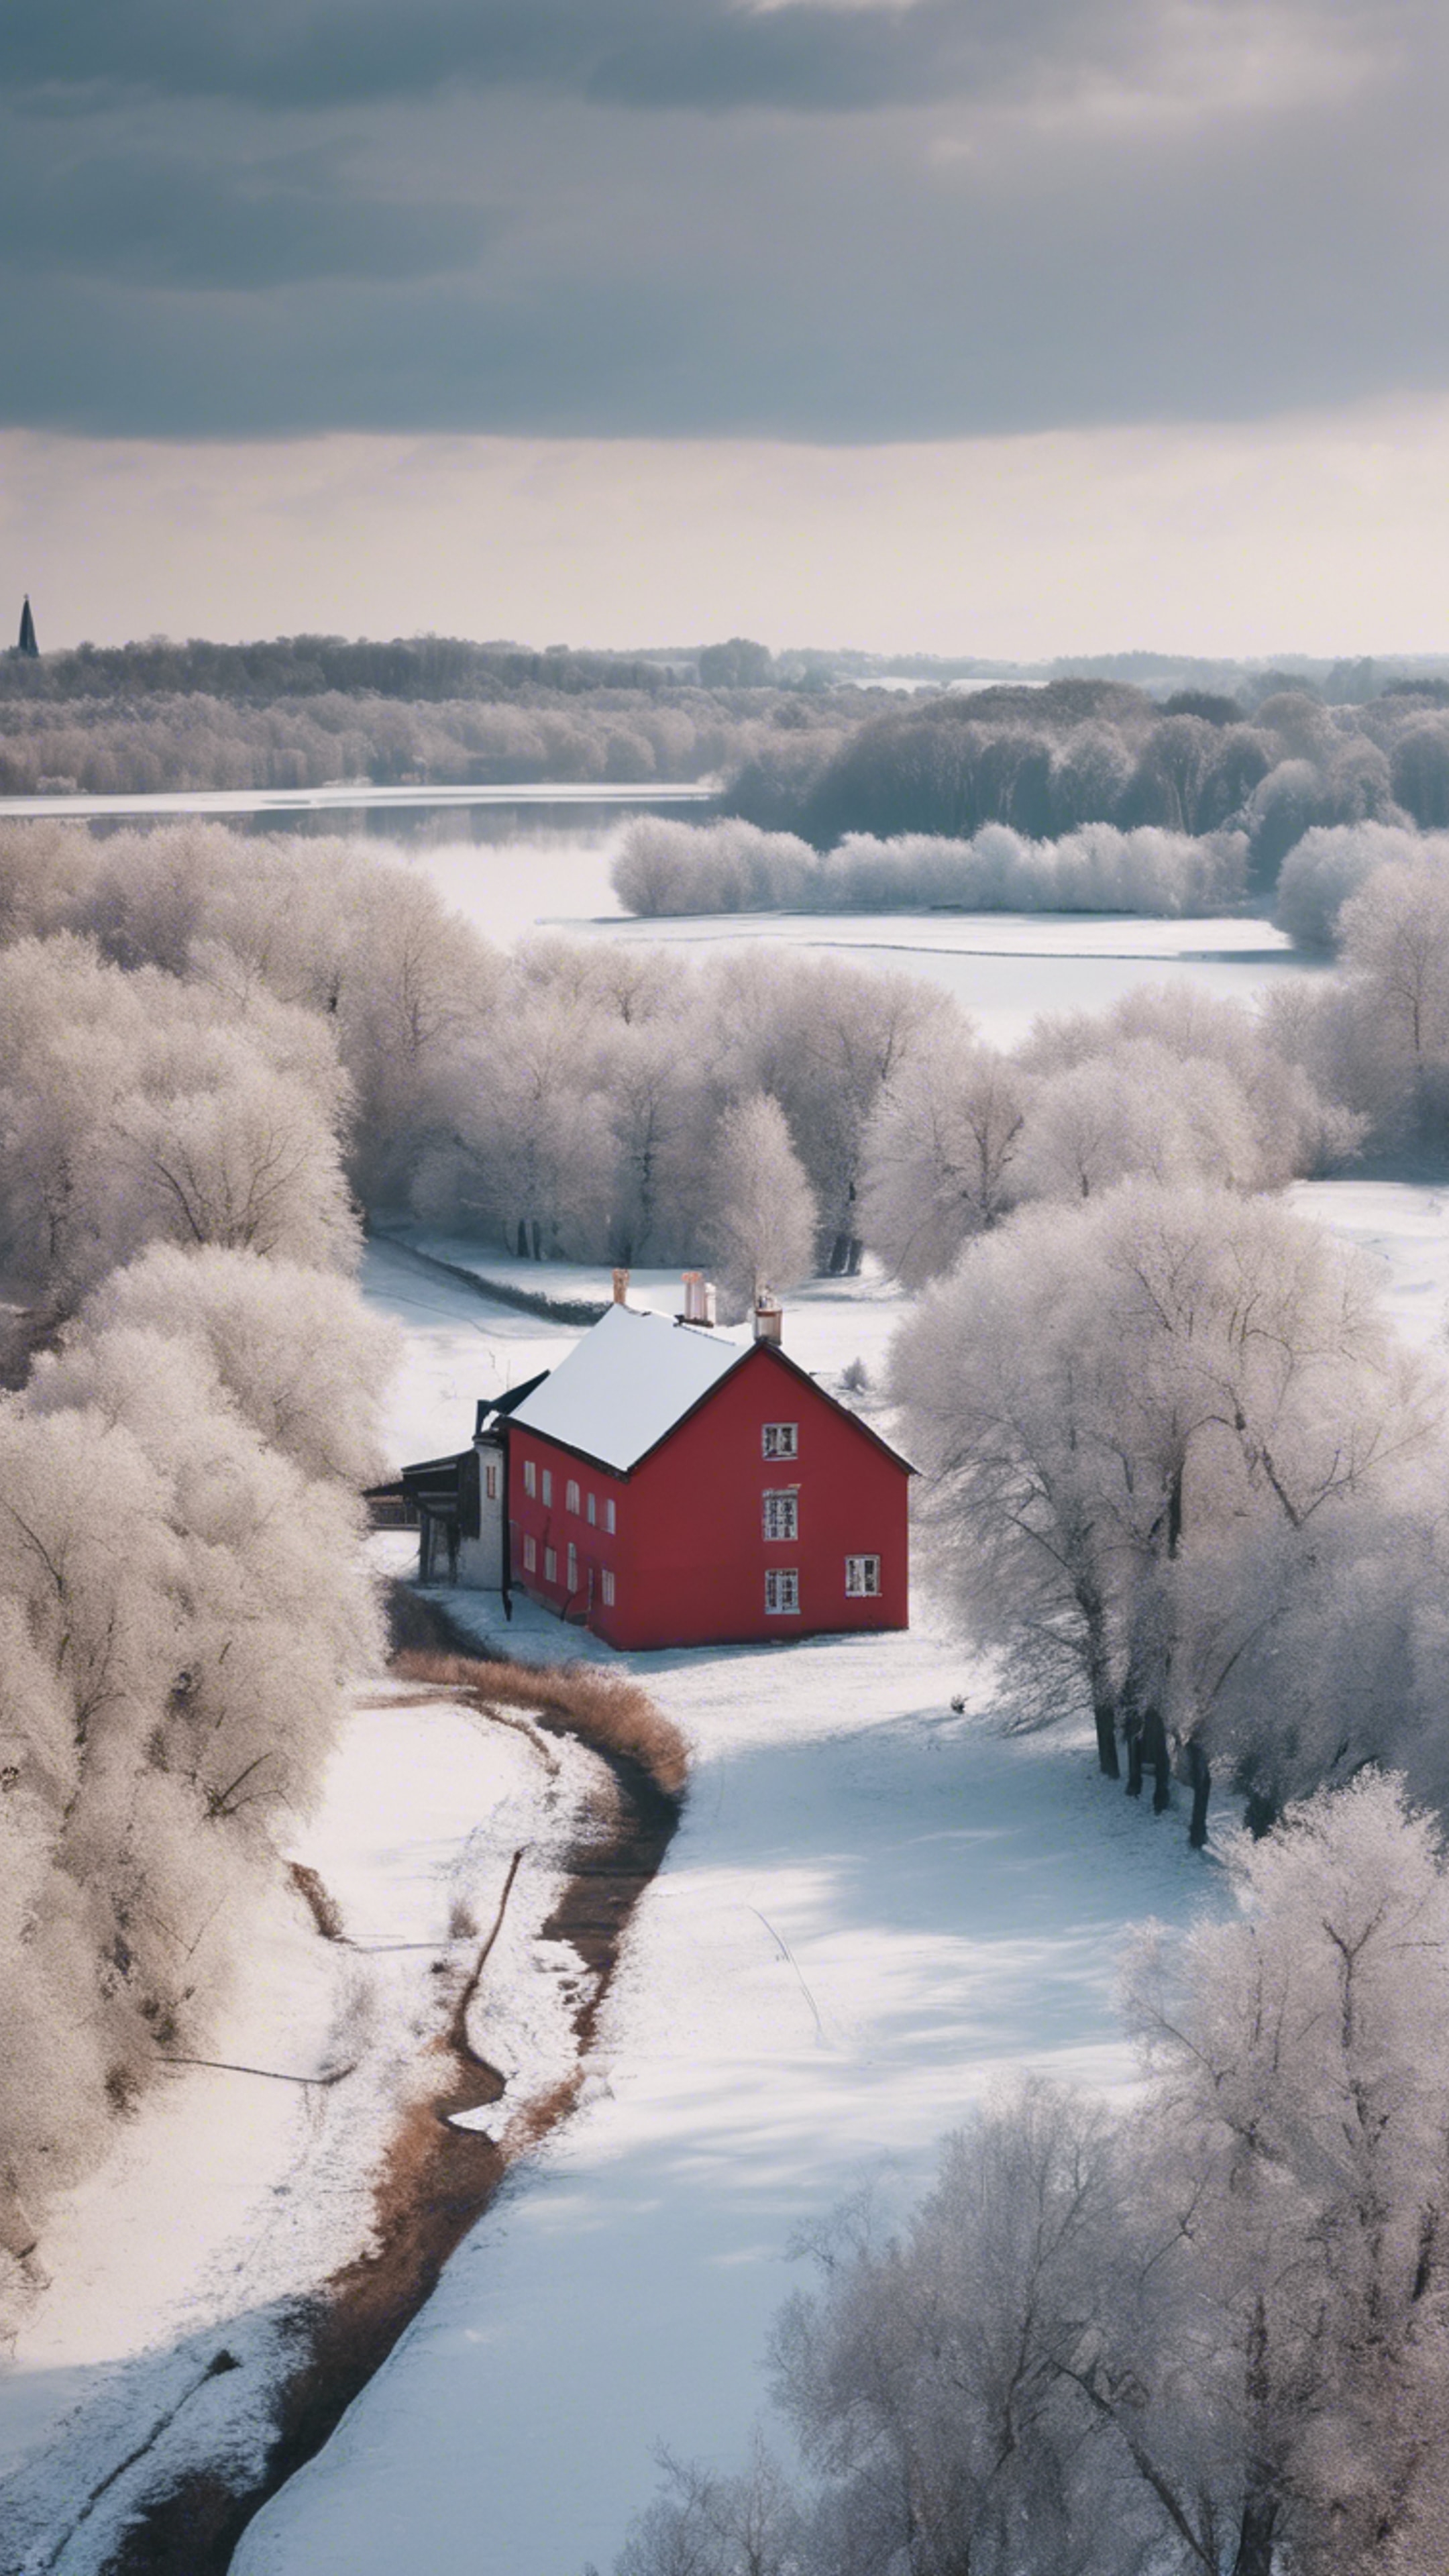 A snow-covered French country landscape with bare trees, a frozen river, and a small red-roofed house in the distance. Wallpaper[86a496d4055745a5962e]